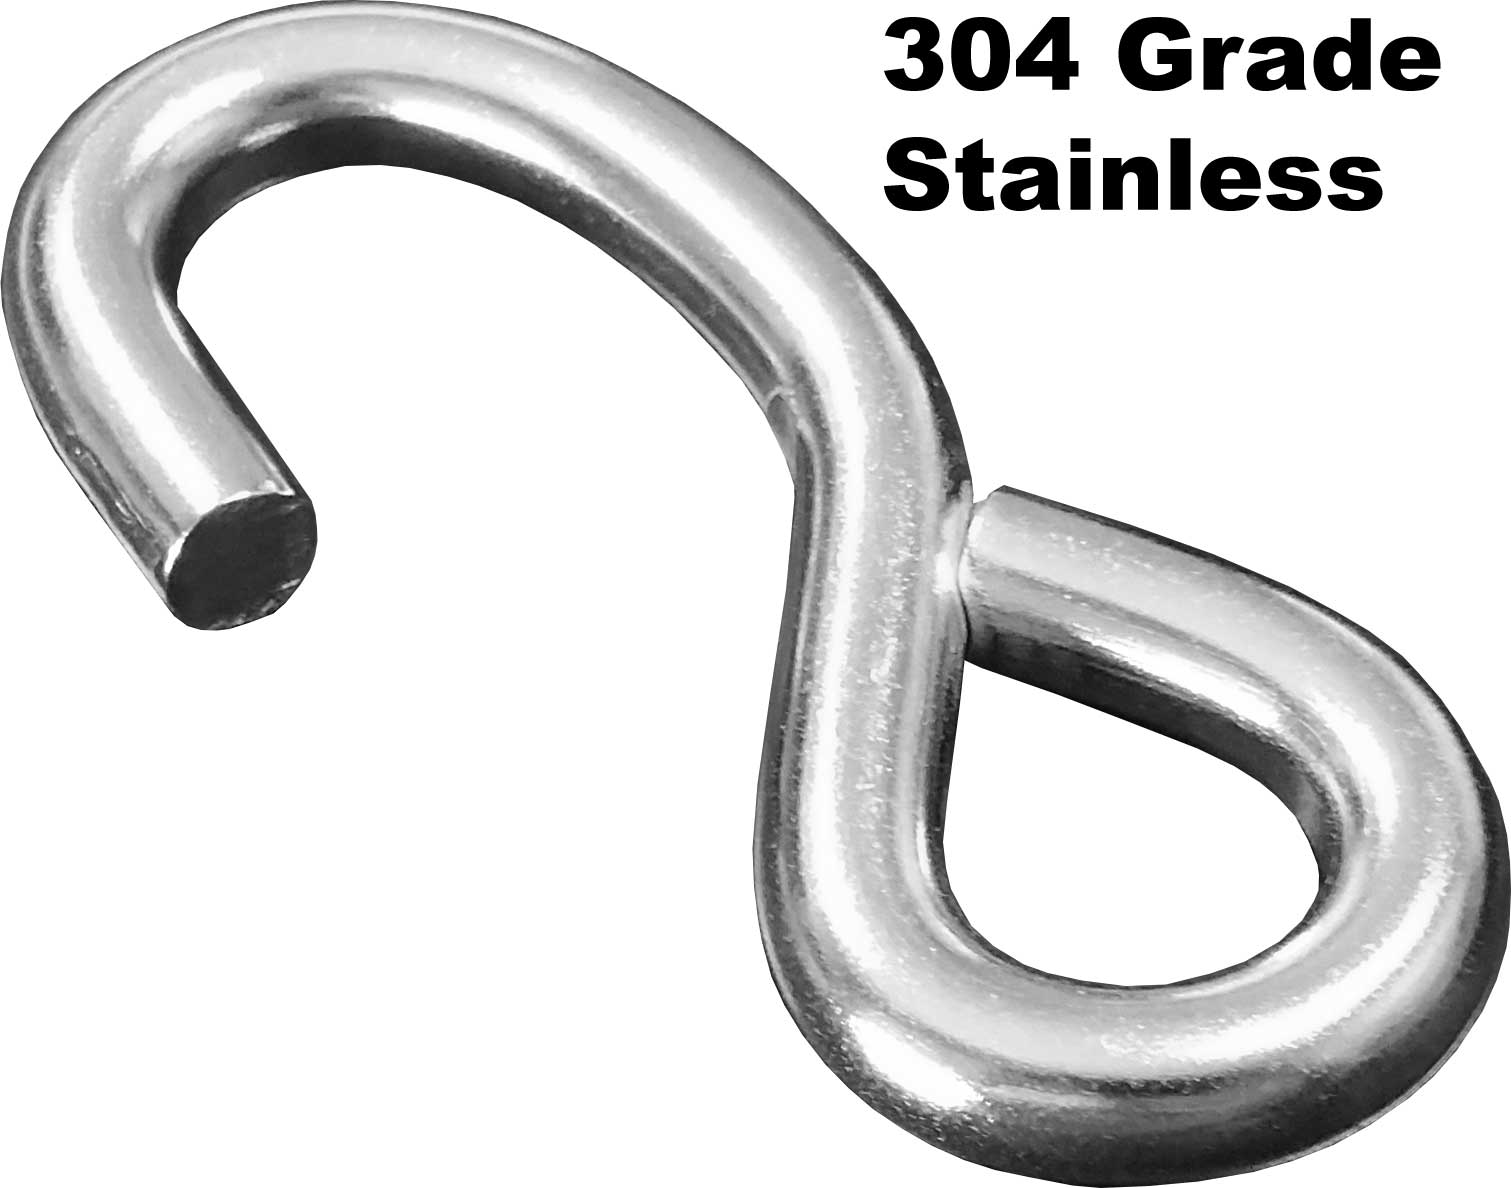  Stainless Steel Boat Tie Downs - 2 Inch